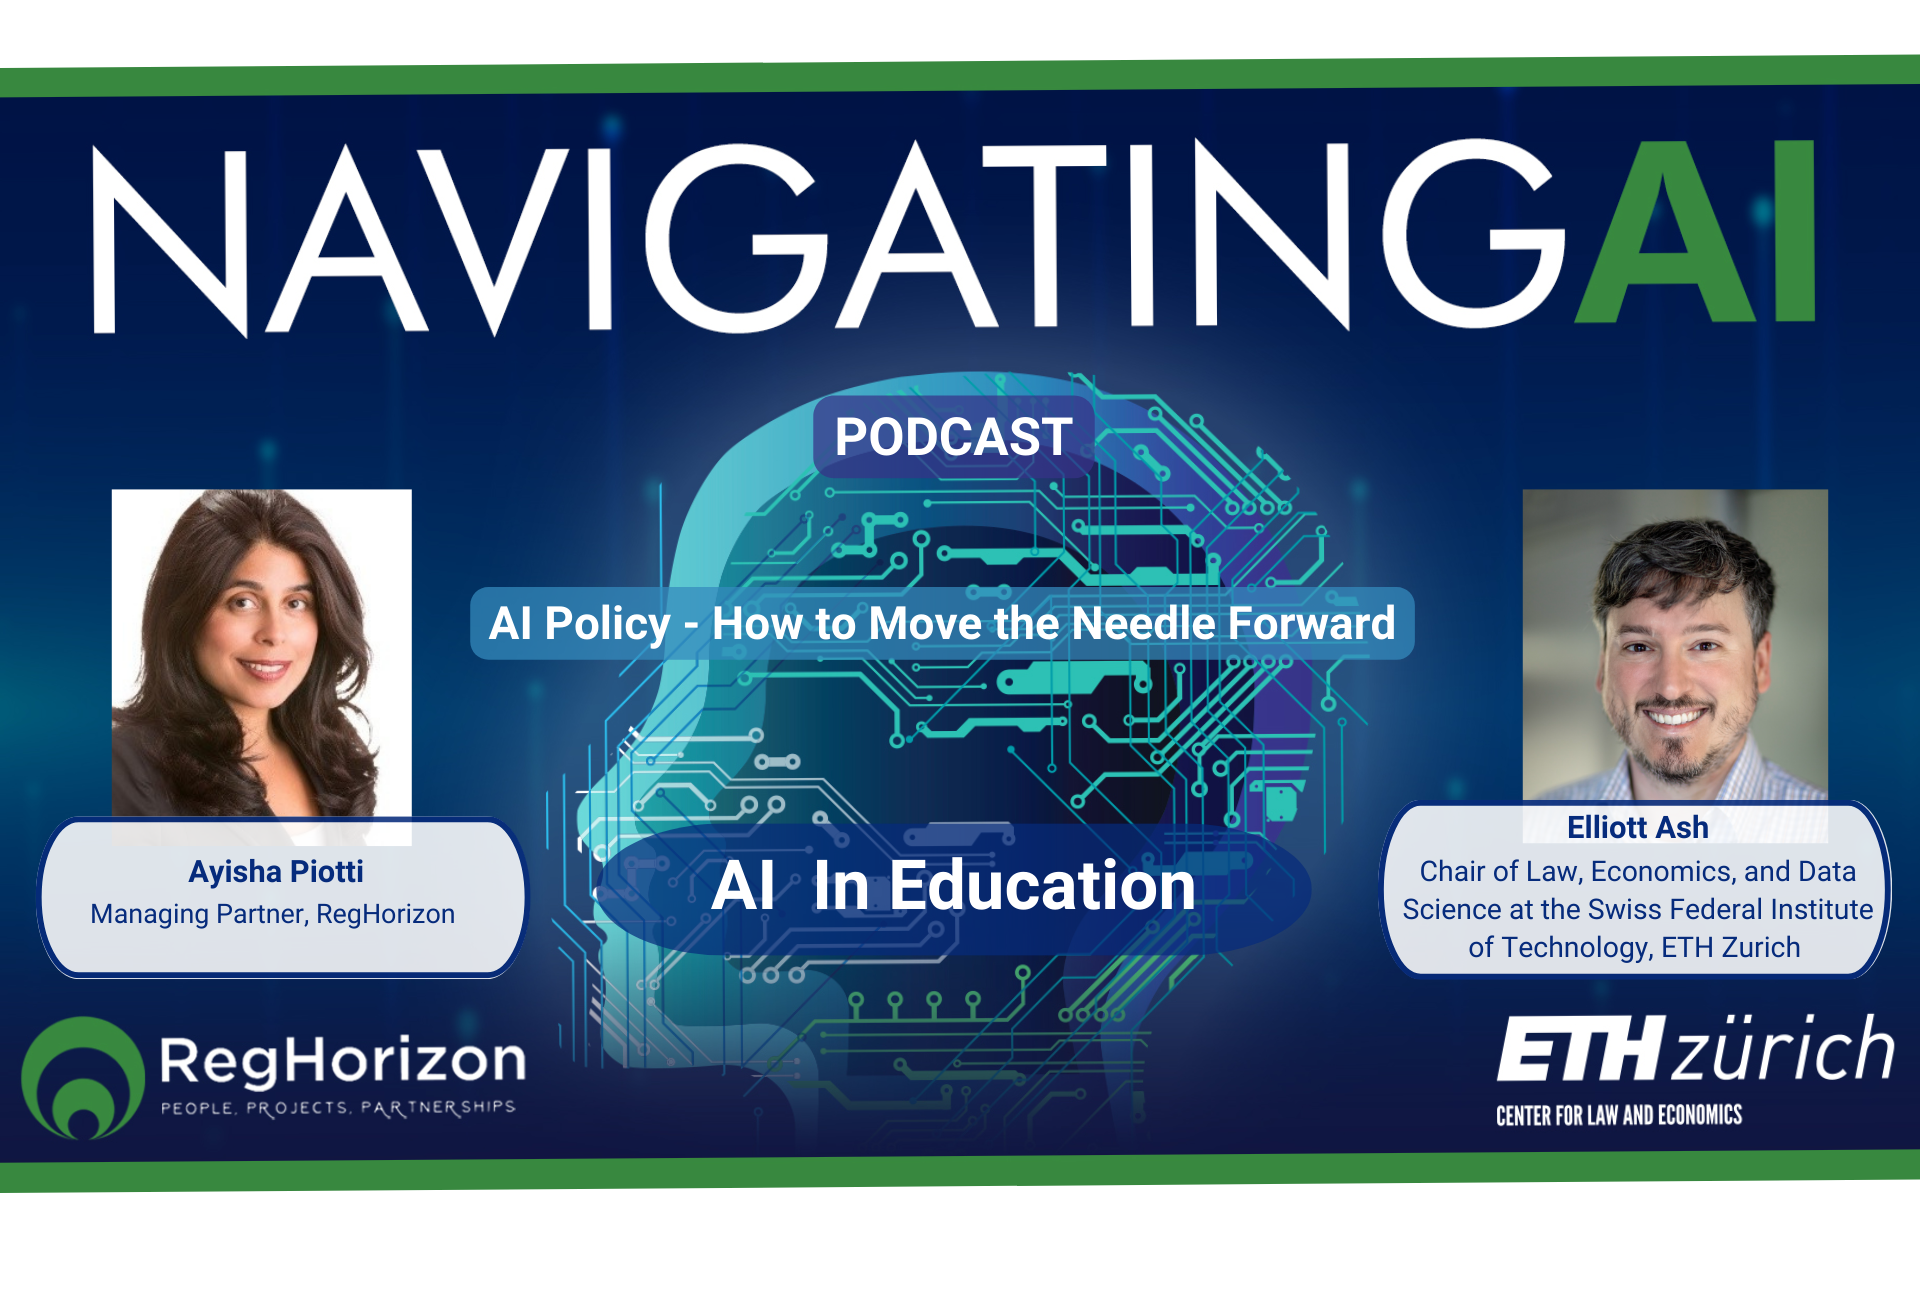 podcast image: Navigating AI, AI In Education